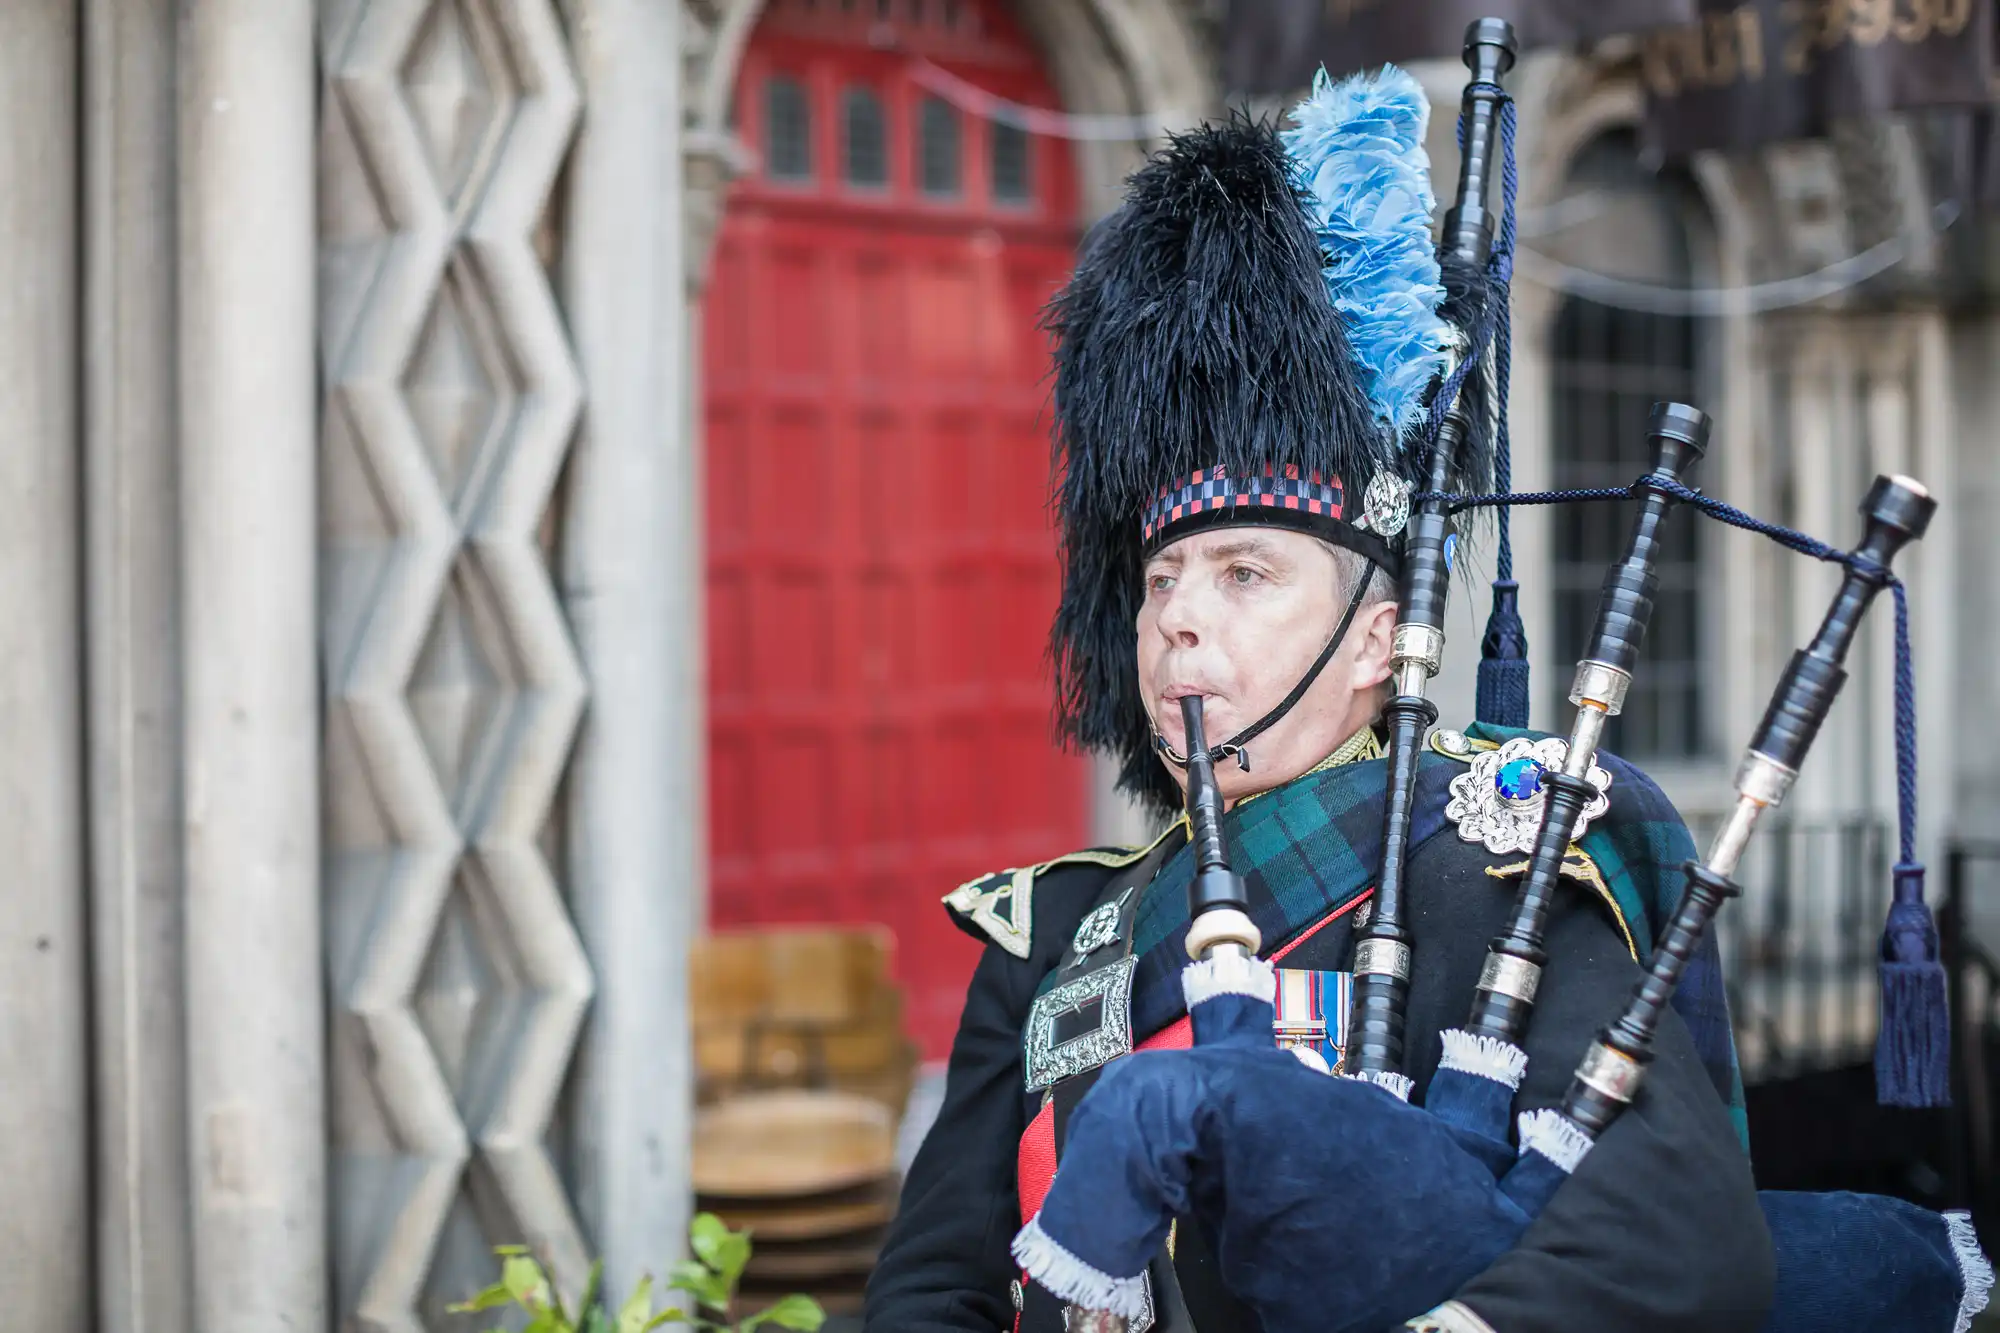 A man in traditional scottish attire playing bagpipes in front of a red door.